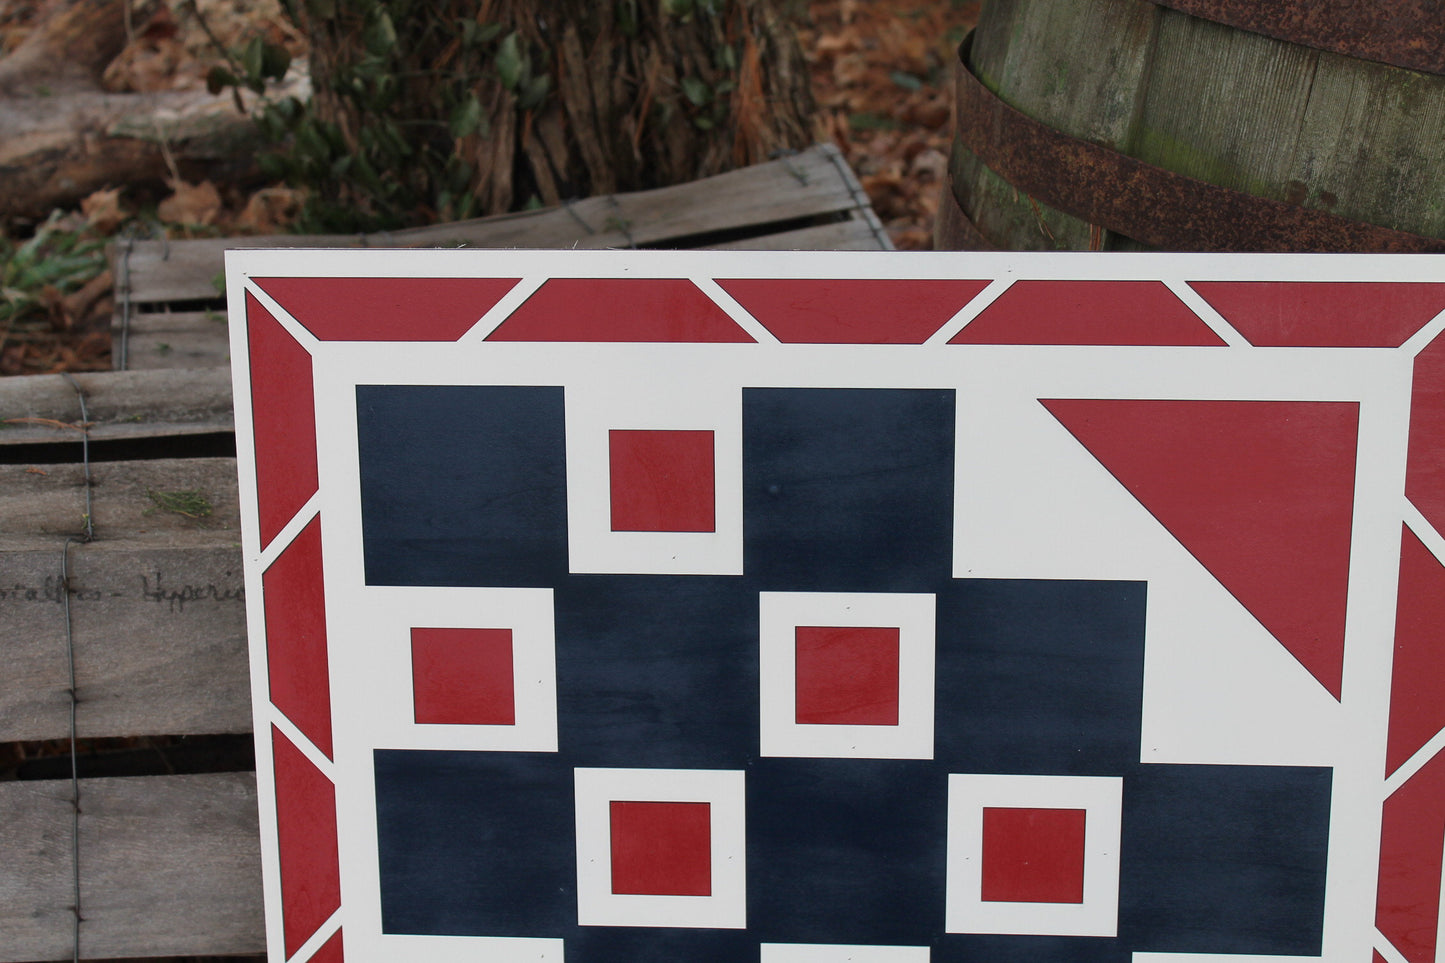 Barn Quilt, Wood Barn Quilt, Barn Decor, Patriotic, Red White Blue, Mosaic, Handmade, Primitive, Wood, Laser Cut Out, Extra Large, Customize